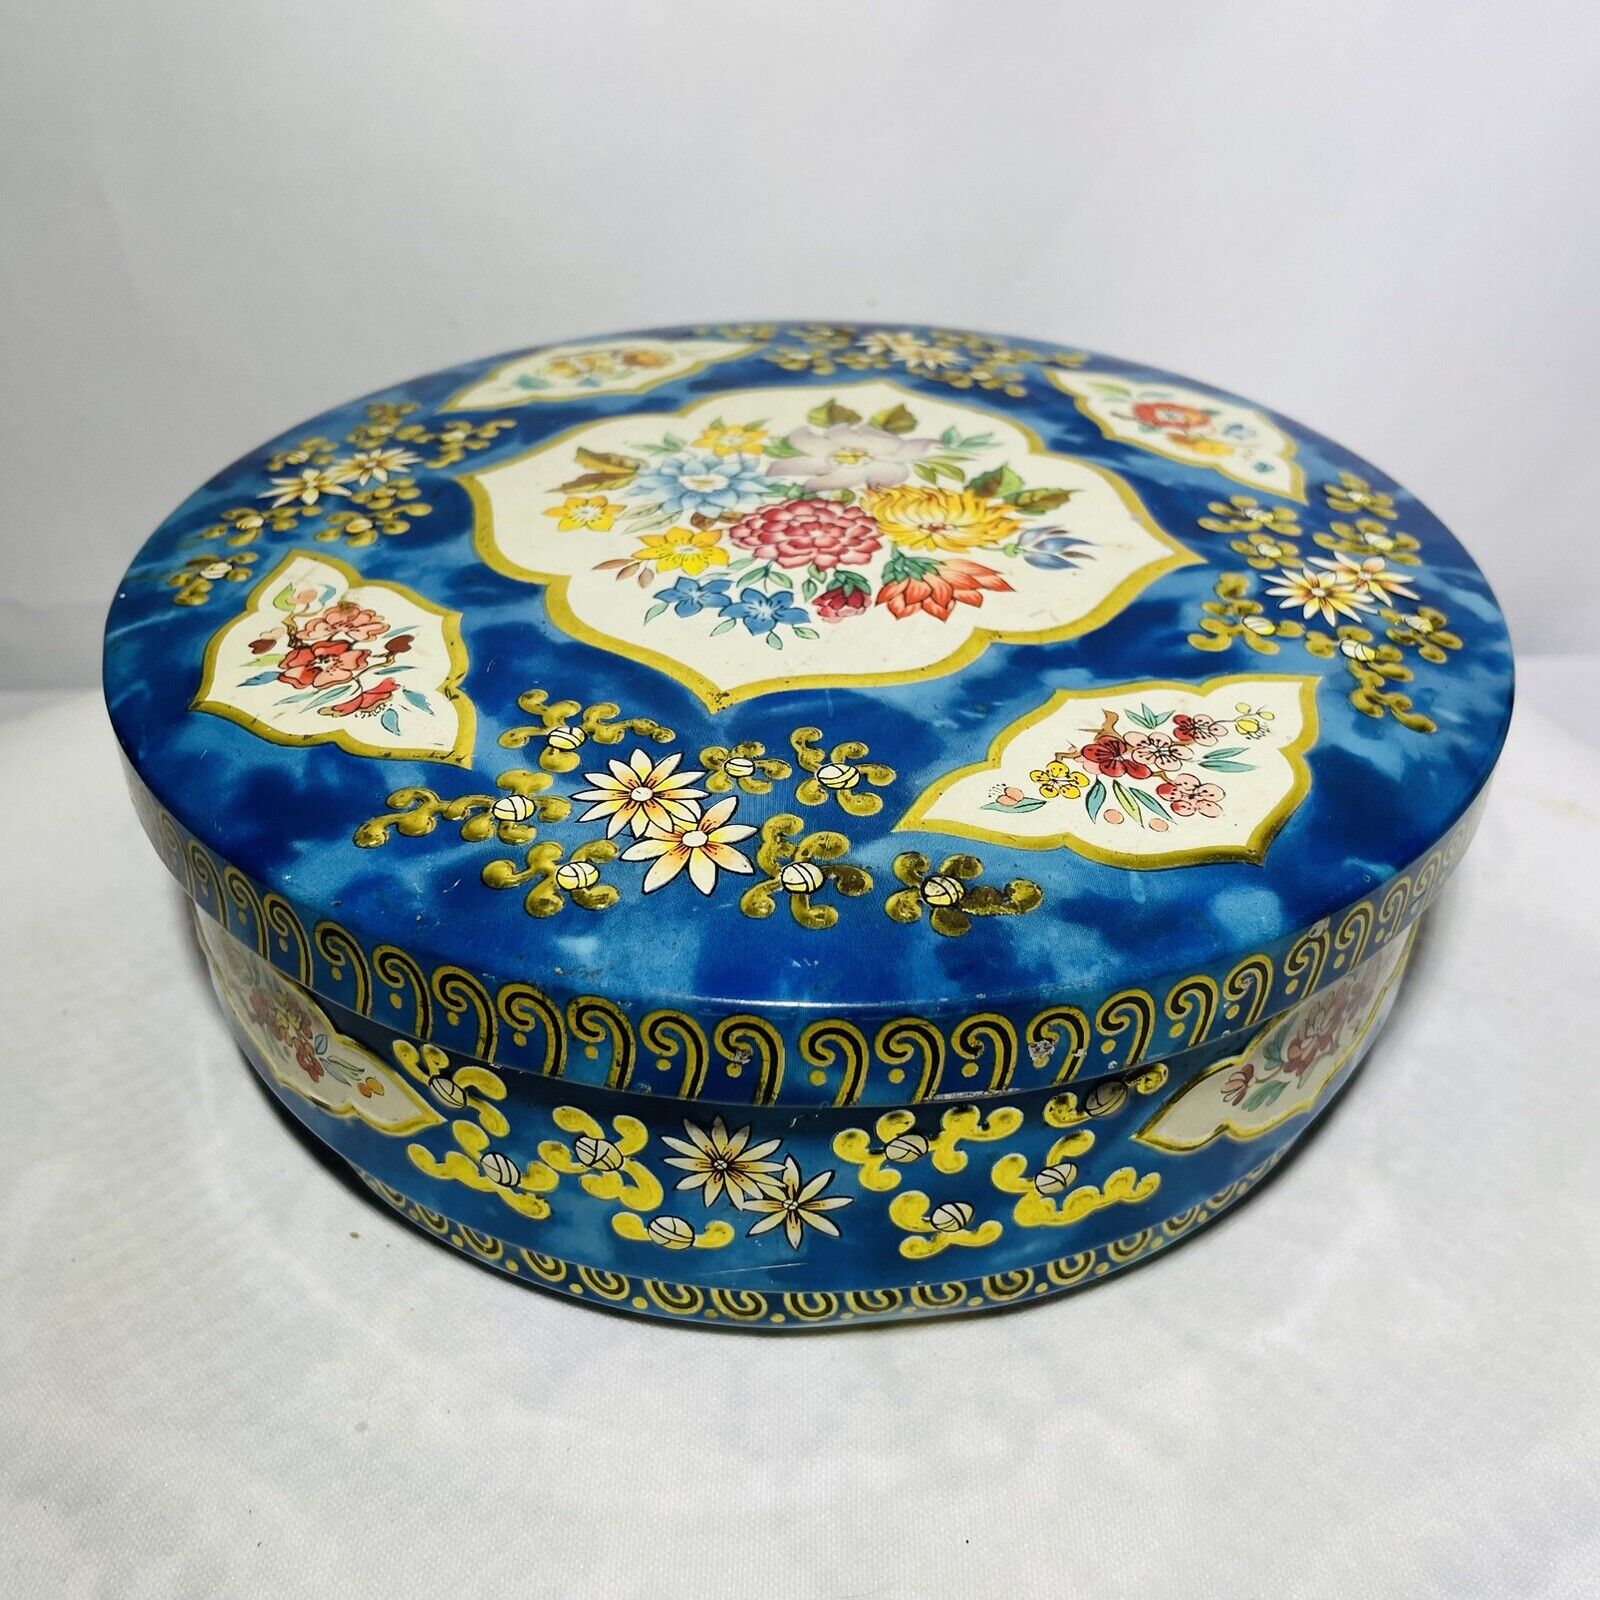 Vintage Huntley & Palmers Biscuit Tin Liverpool England Blue Floral Gold Round